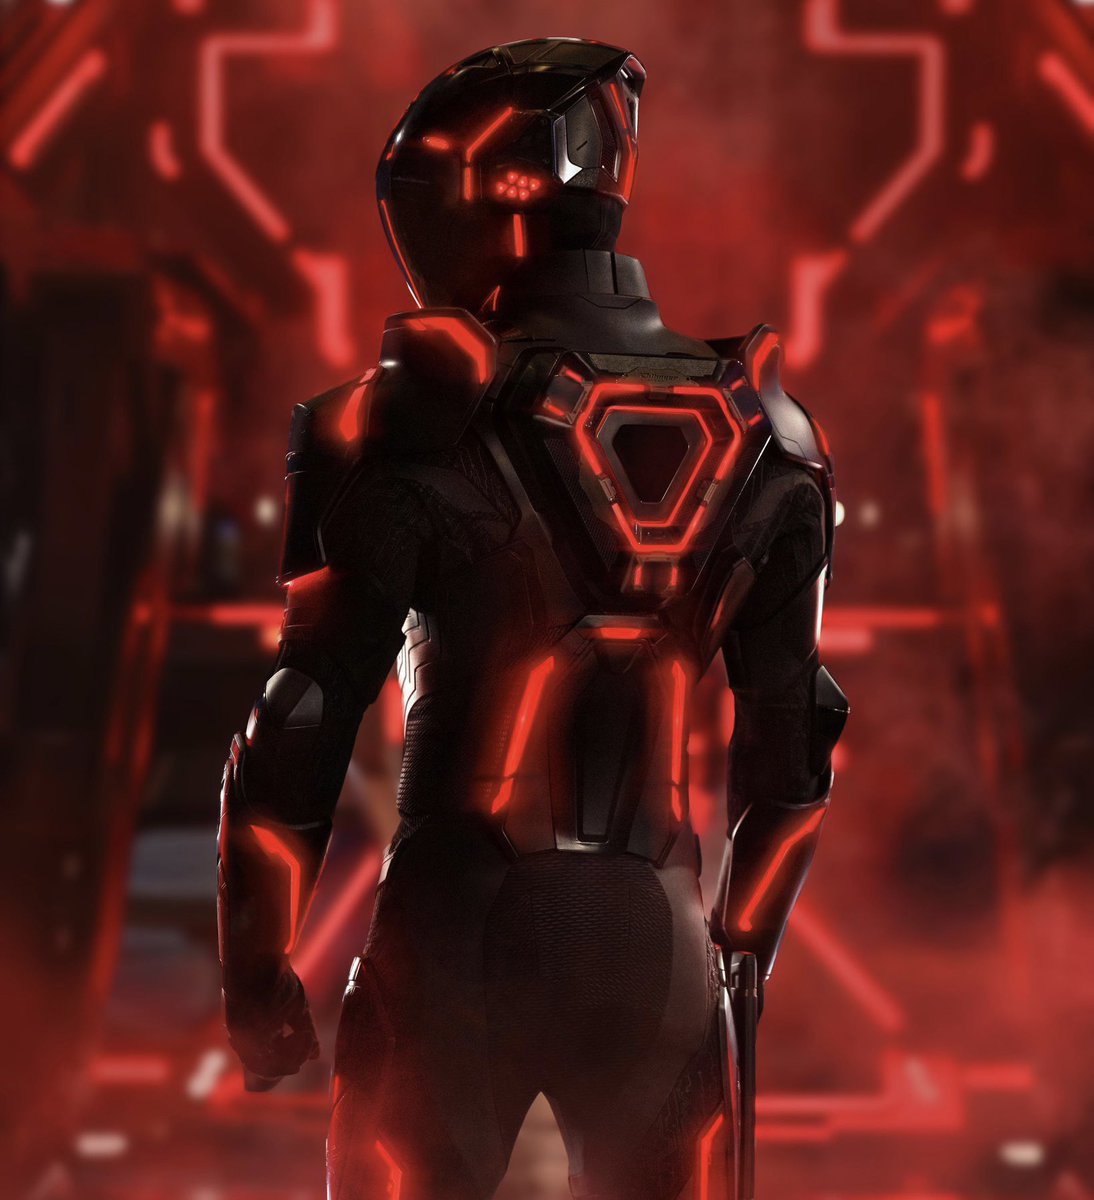 ‘TRON ARES’ has wrapped filming.

Releasing in theaters October 10, 2025